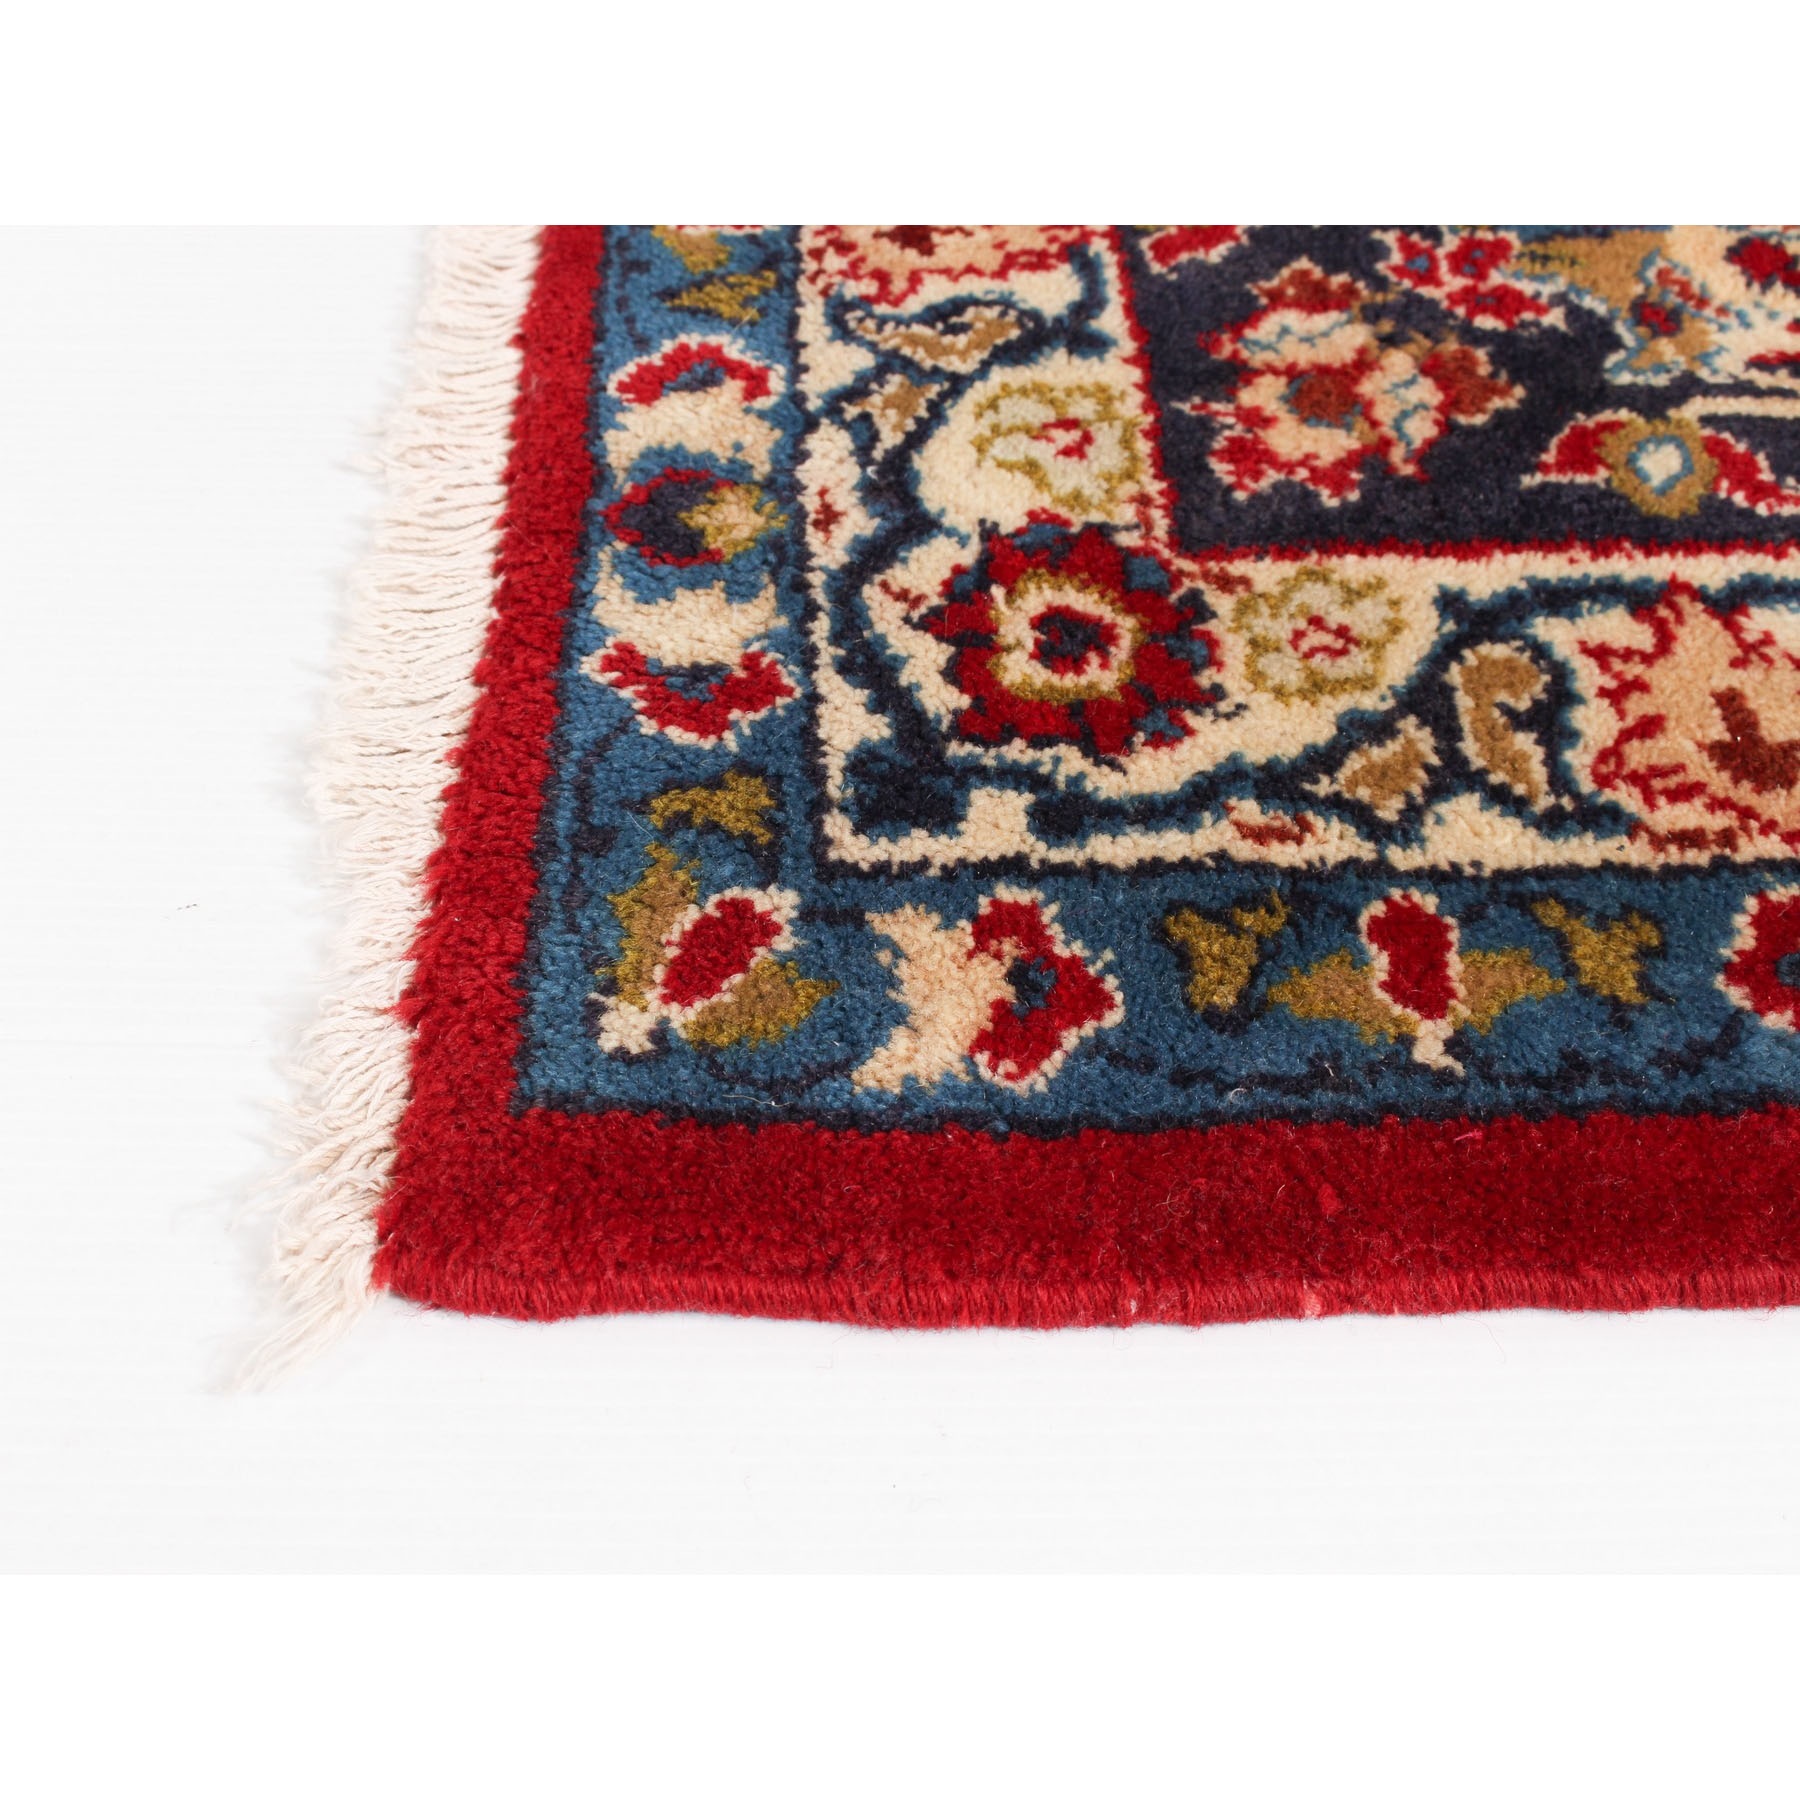 9-10 x14-1  Red Semi Antique Persian Isfahan Pure wool Hand Knotted Oriental Rug r47881